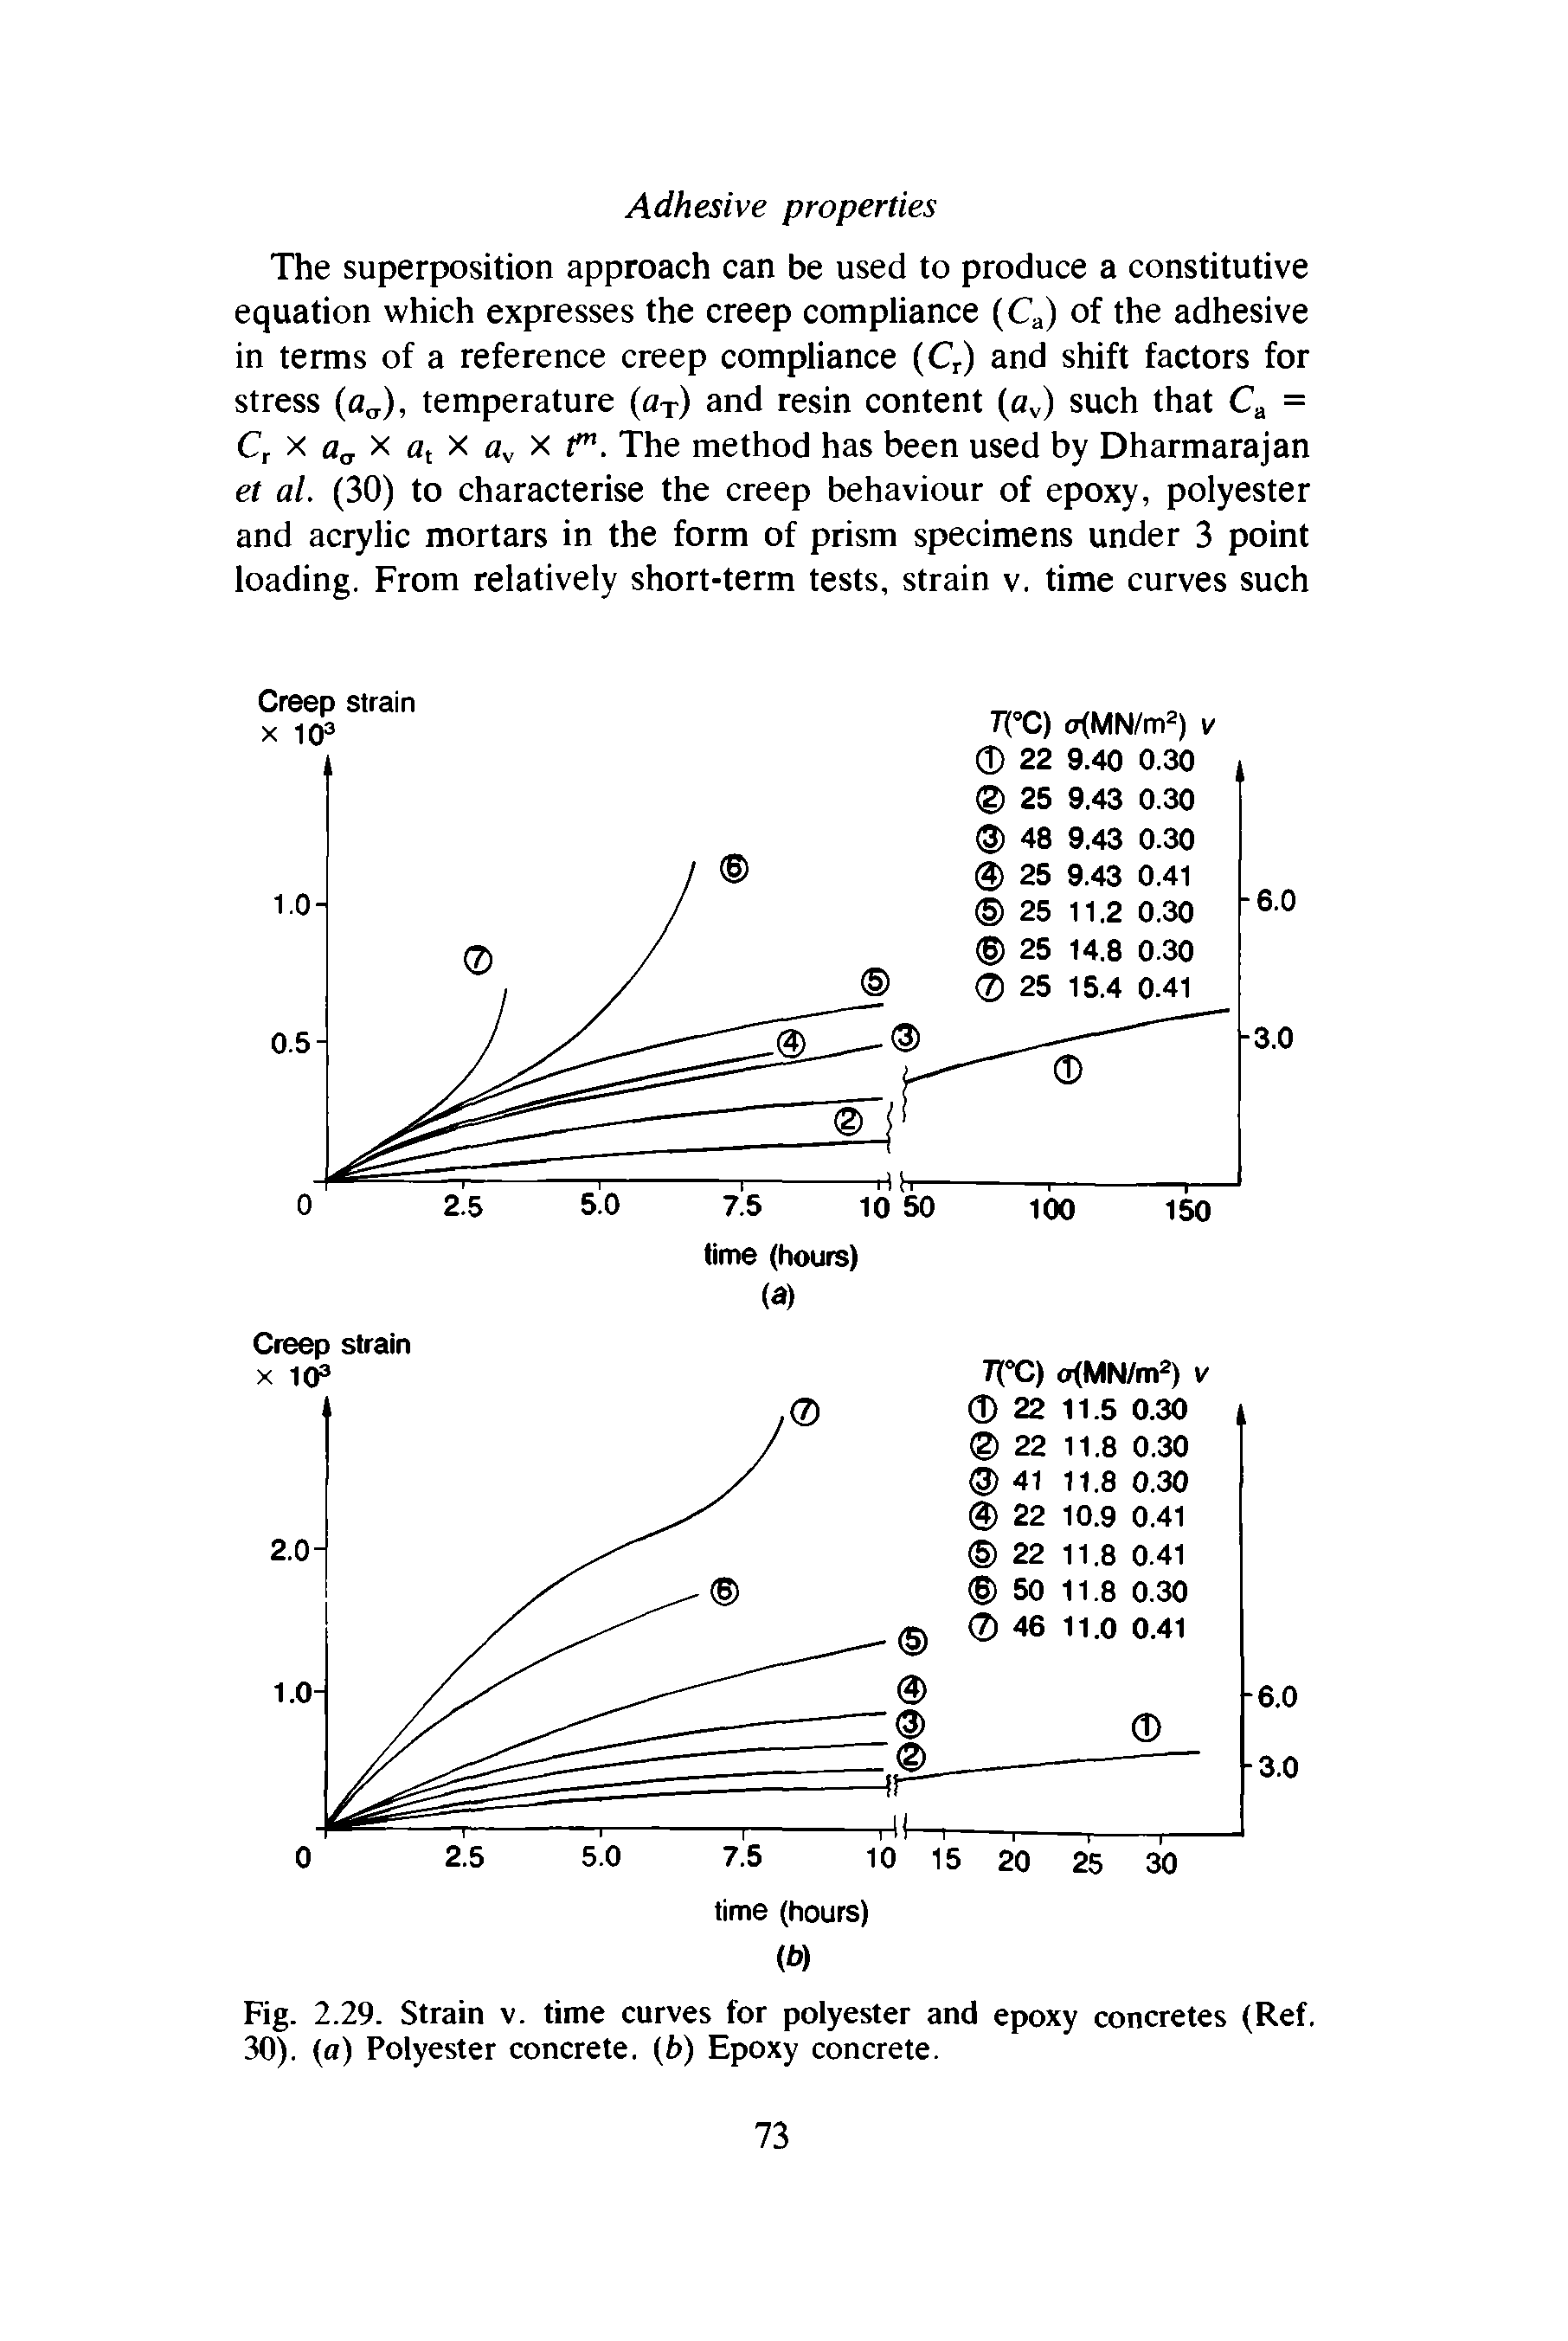 Fig. 2.29. Strain v. time curves for polyester and epoxy concretes (Ref. 30). (a) Polyester concrete, (b) Epoxy concrete.